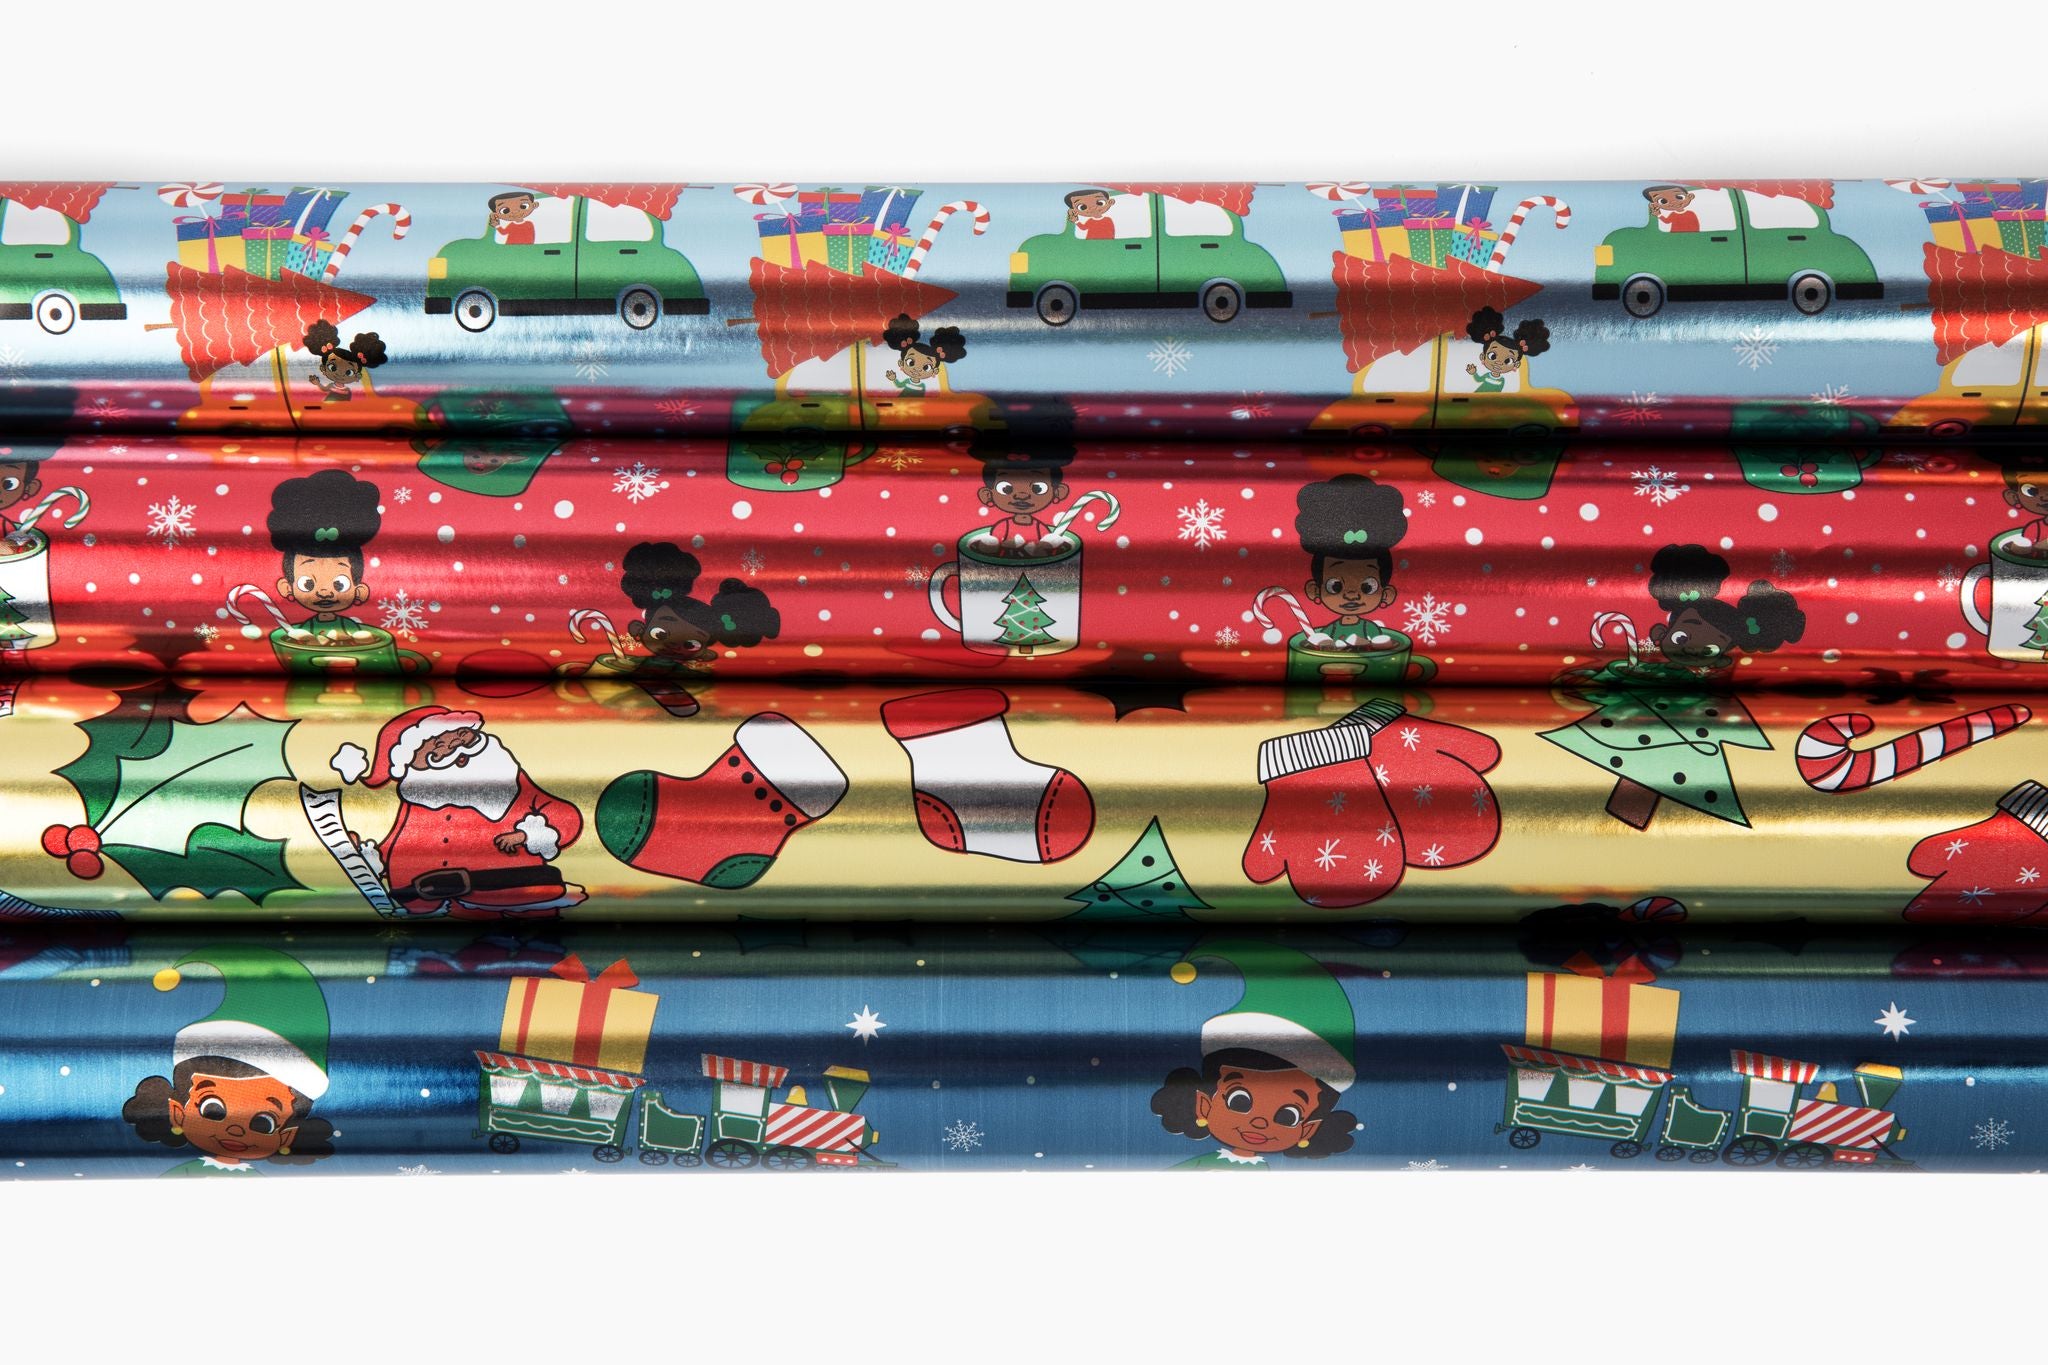 Rock and Roll Soul Skull Premium Gift Wrap Wrapping Paper Roll